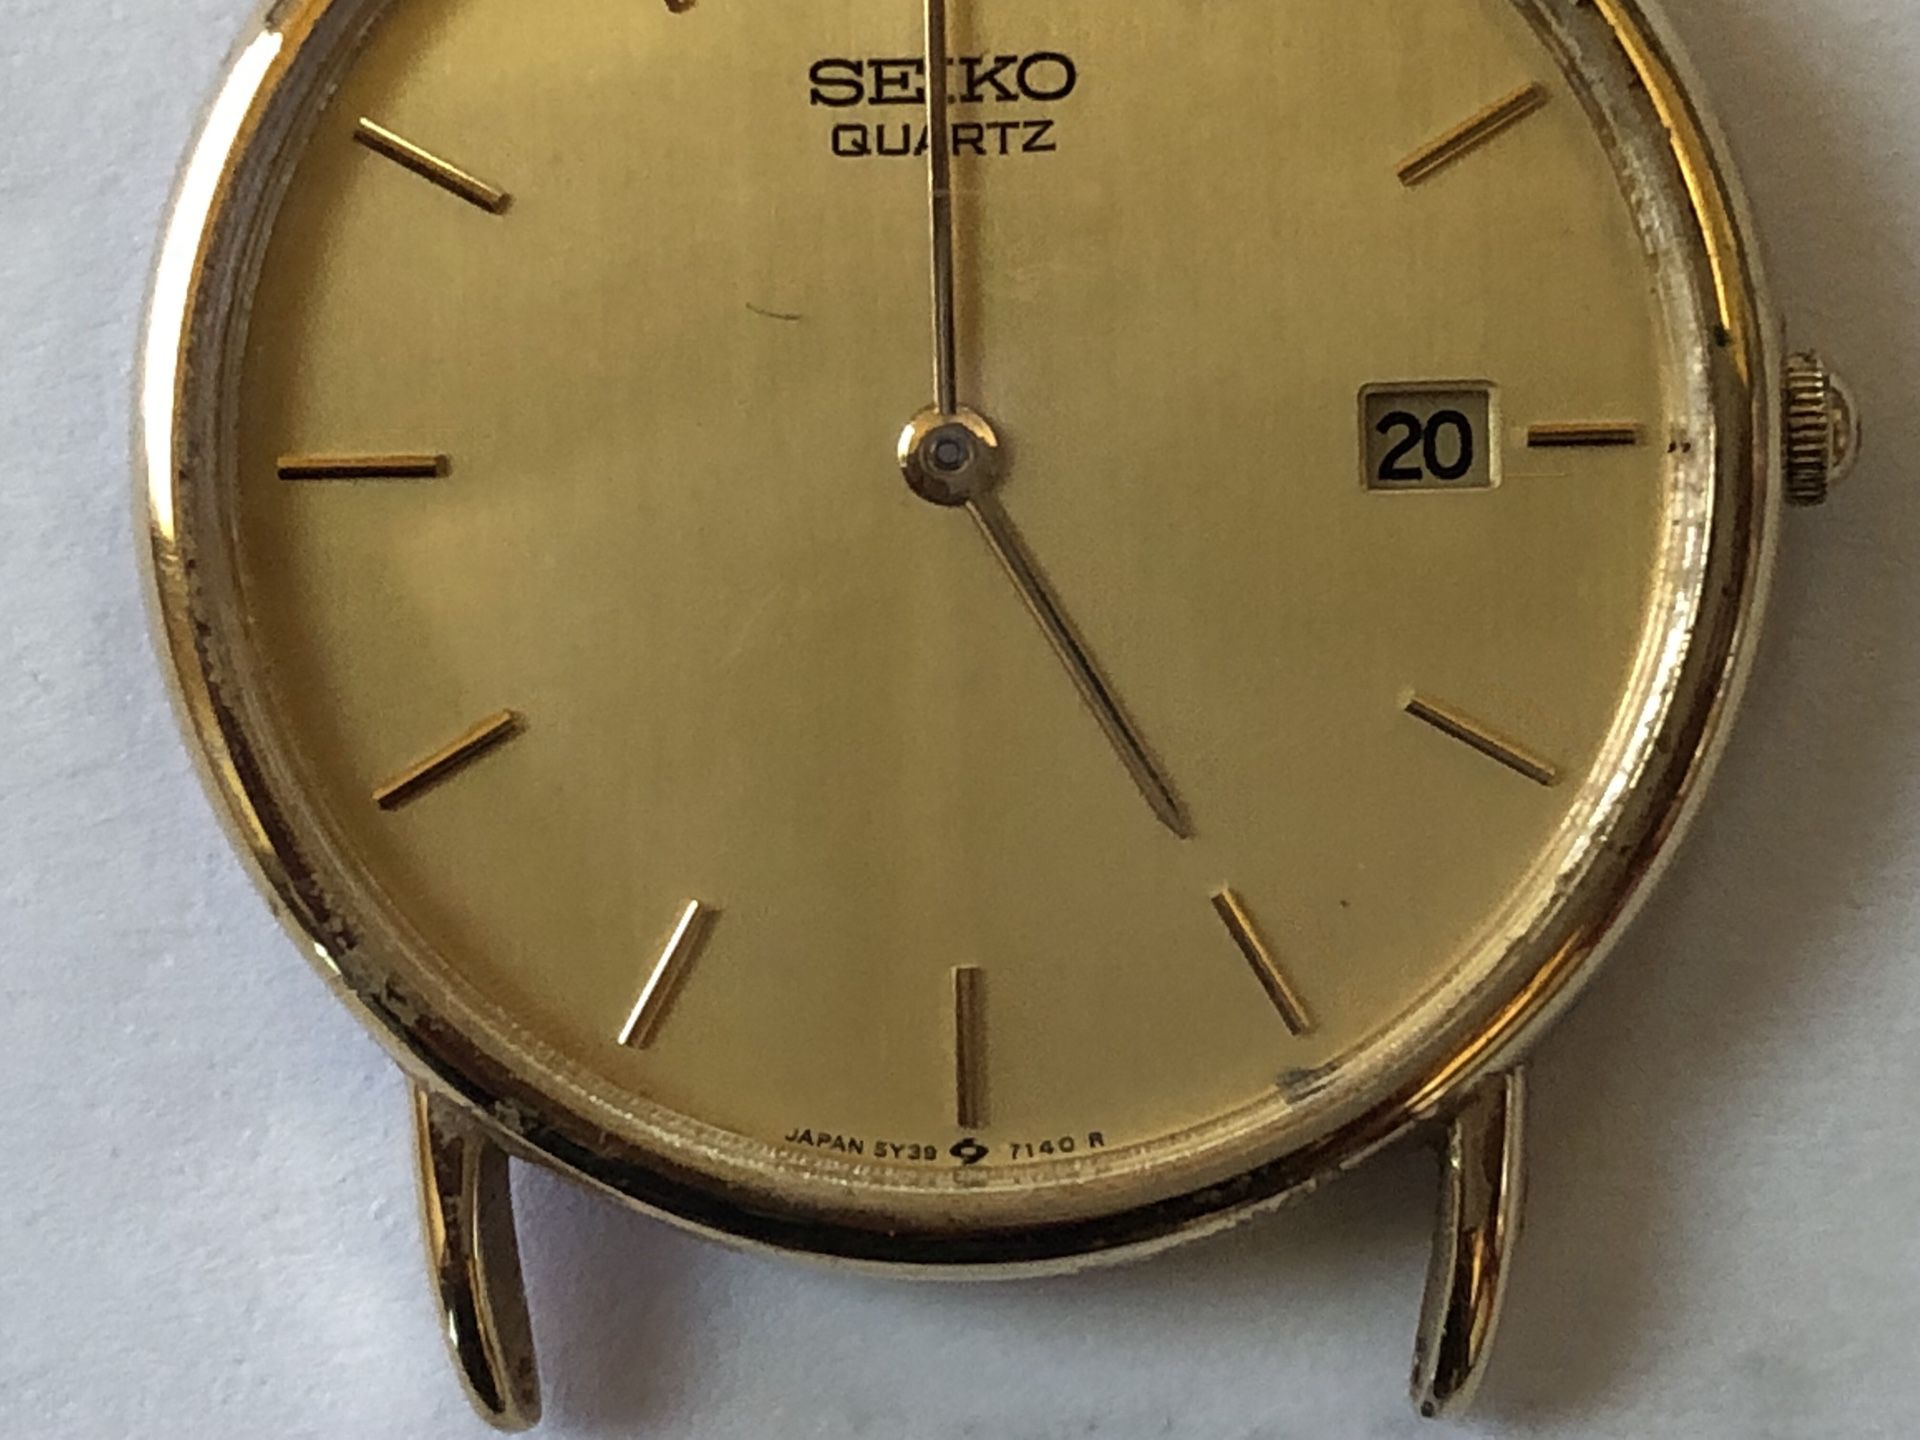 Vintage Seiko 5Y39-7010 Date made Japan for Sale in Henderson, NV - OfferUp